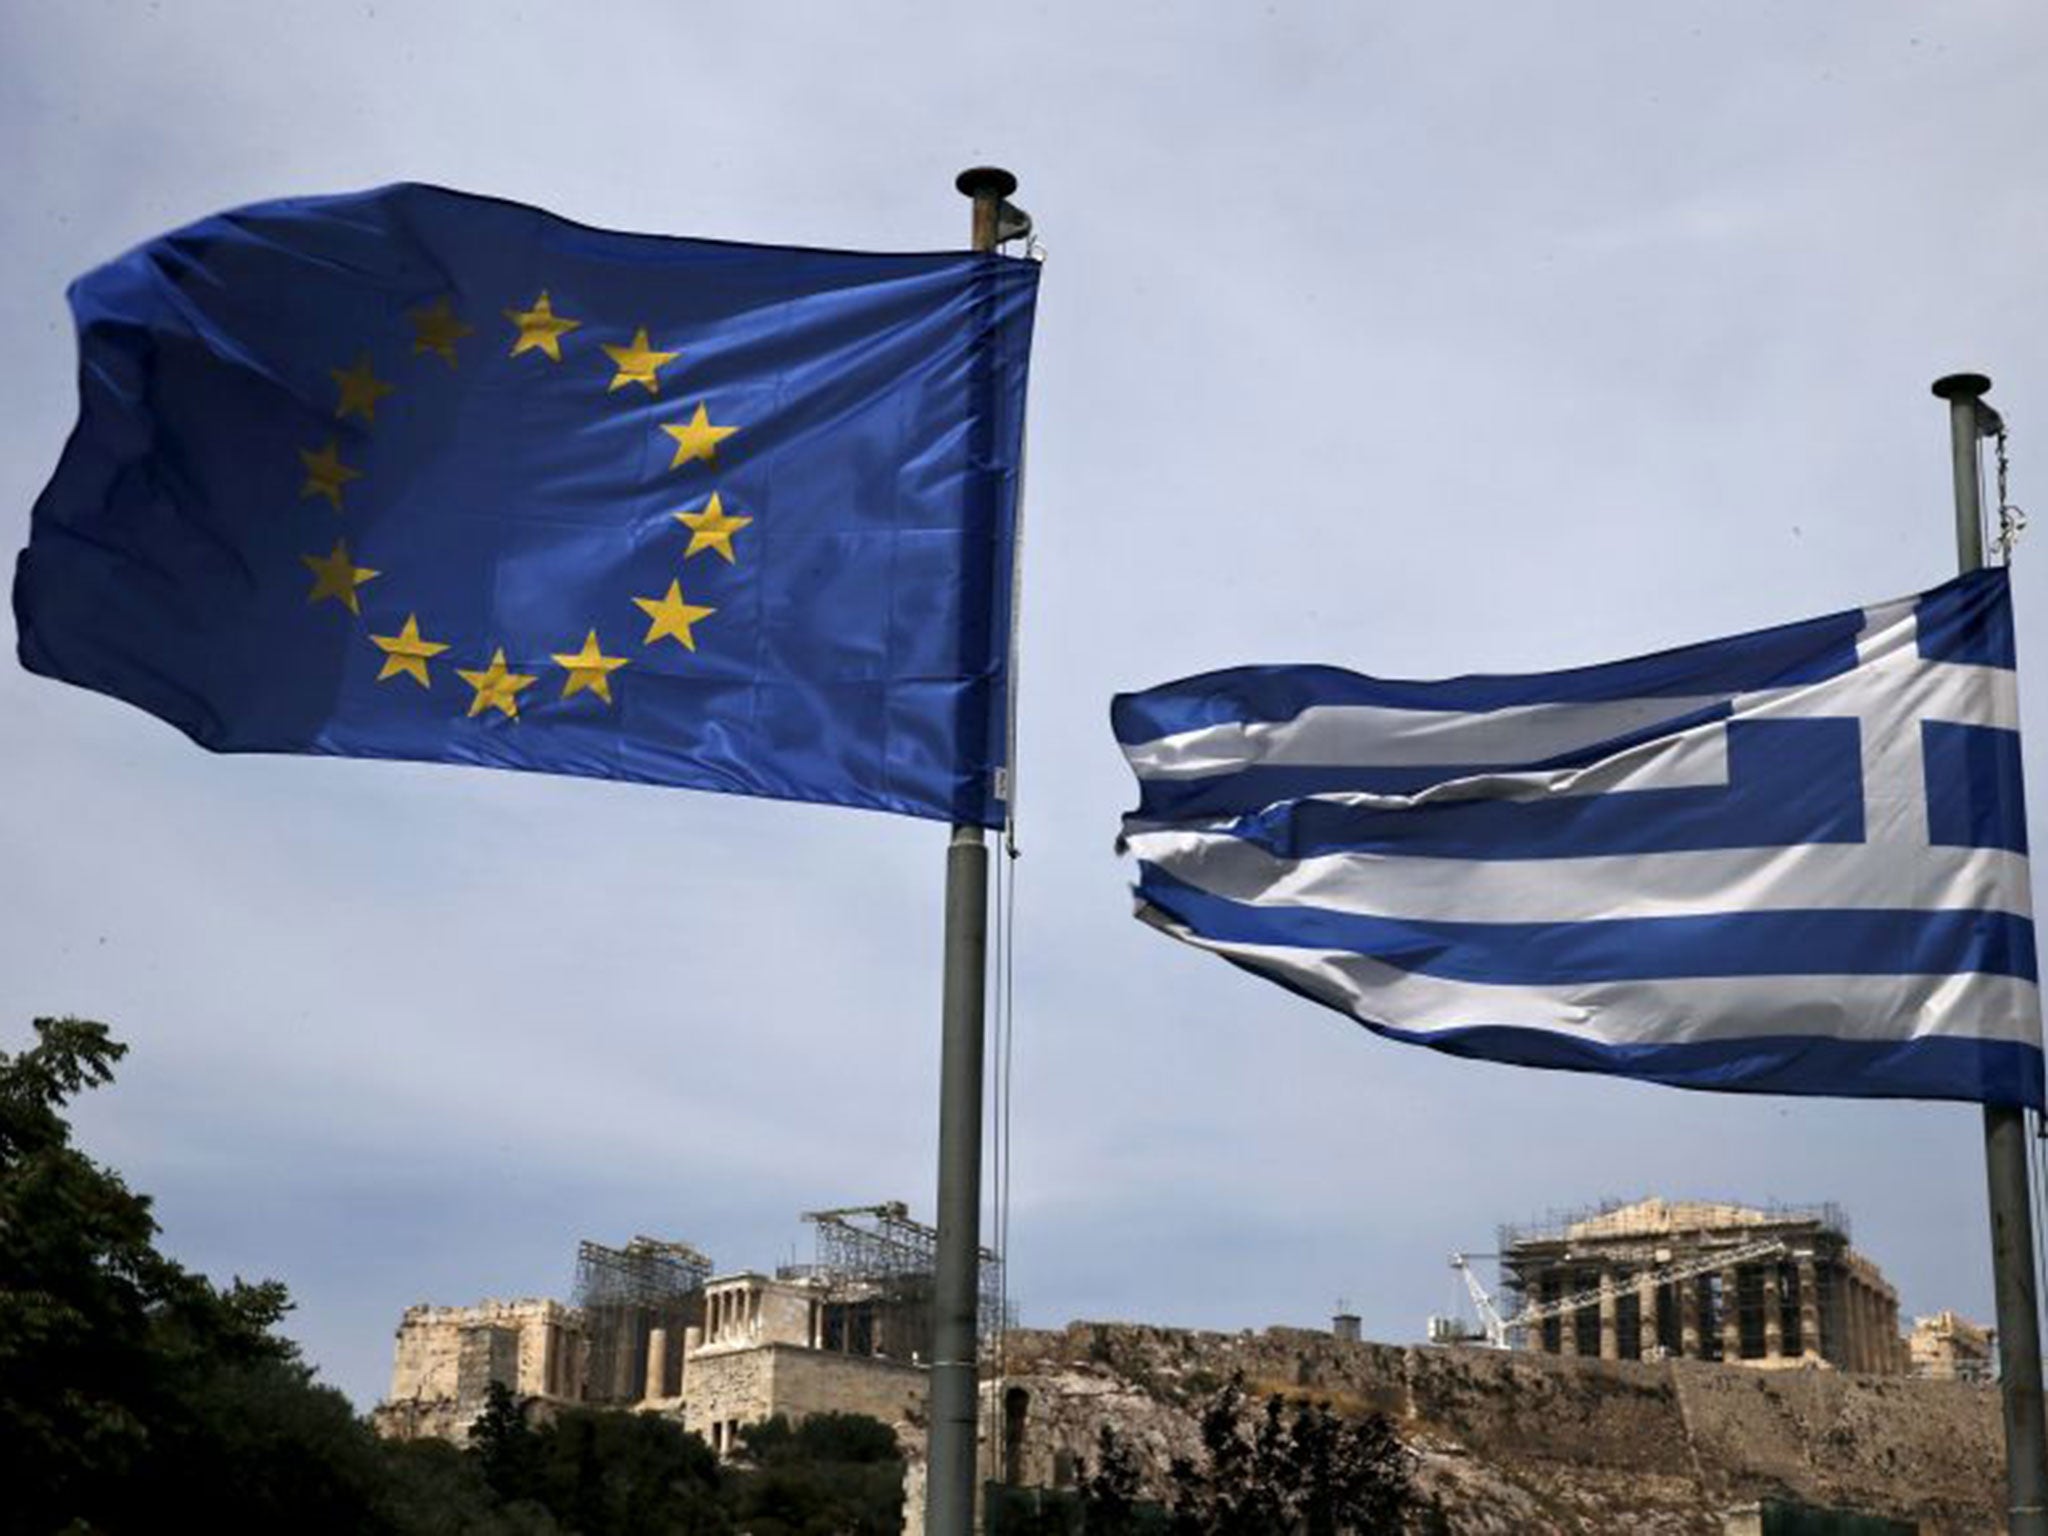 Greece’s troubles continue – but endless fudges may harm the eurozone more than a Grexit